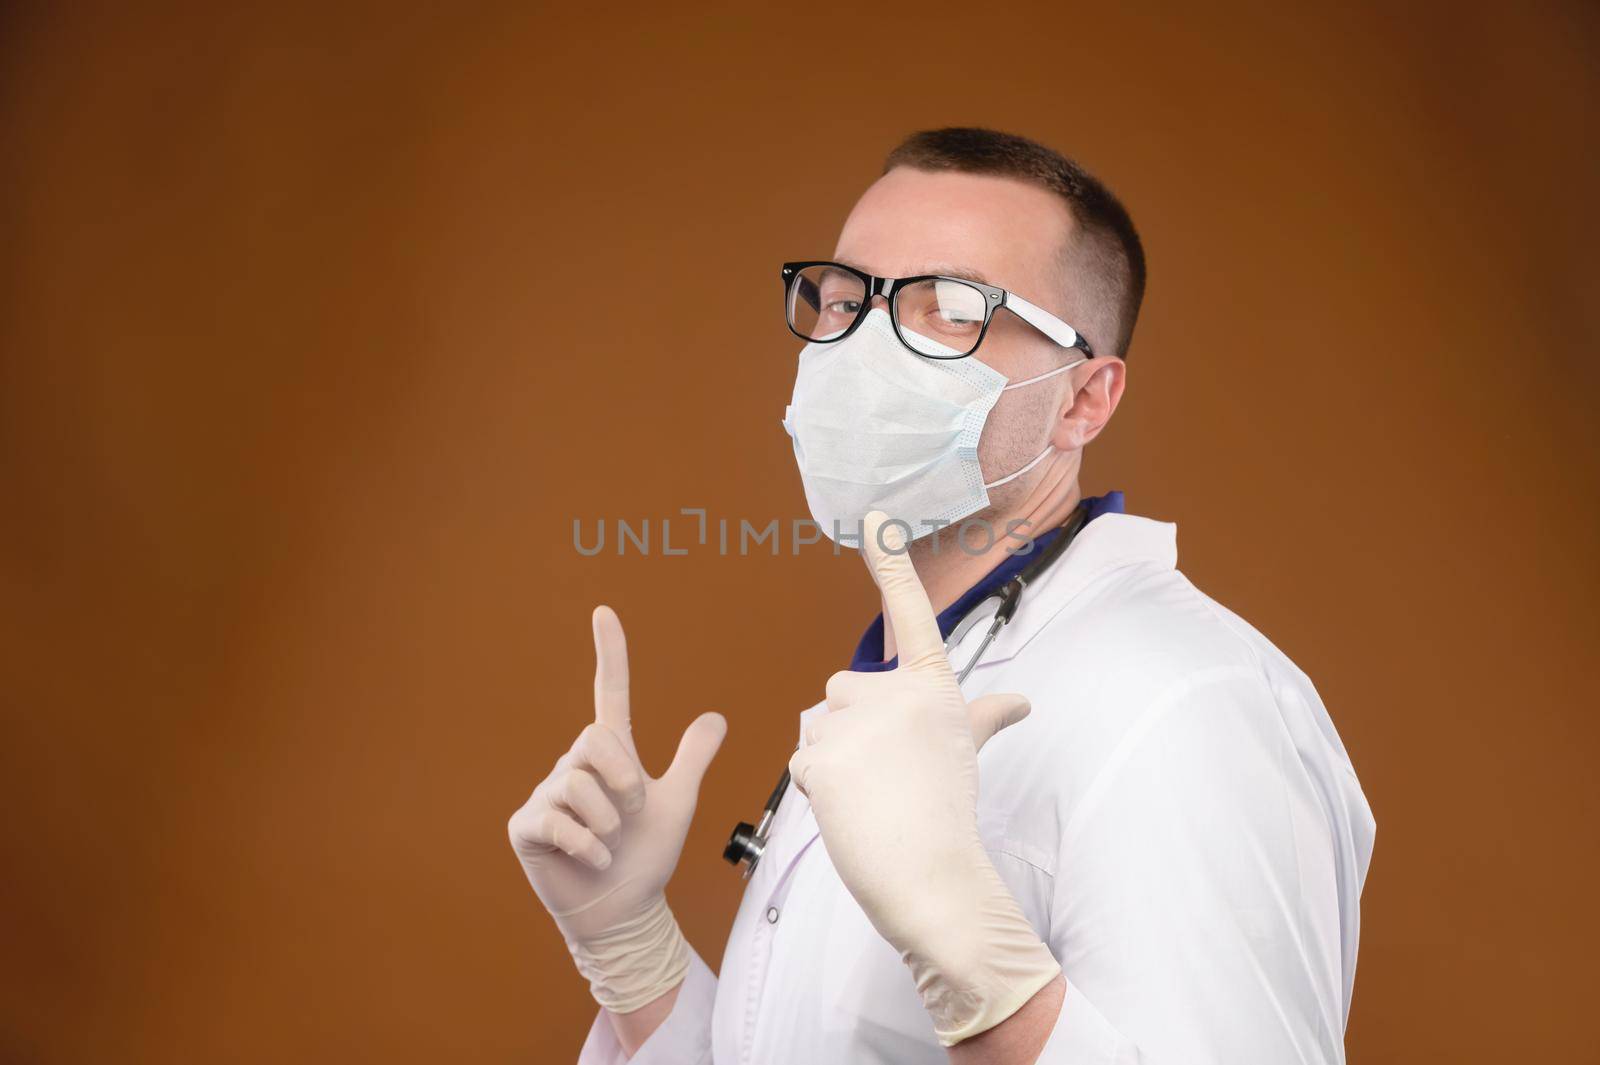 A happy caucasian medic in a white coat with glasses and a mask is dancing in the studio pointing up his index fingers